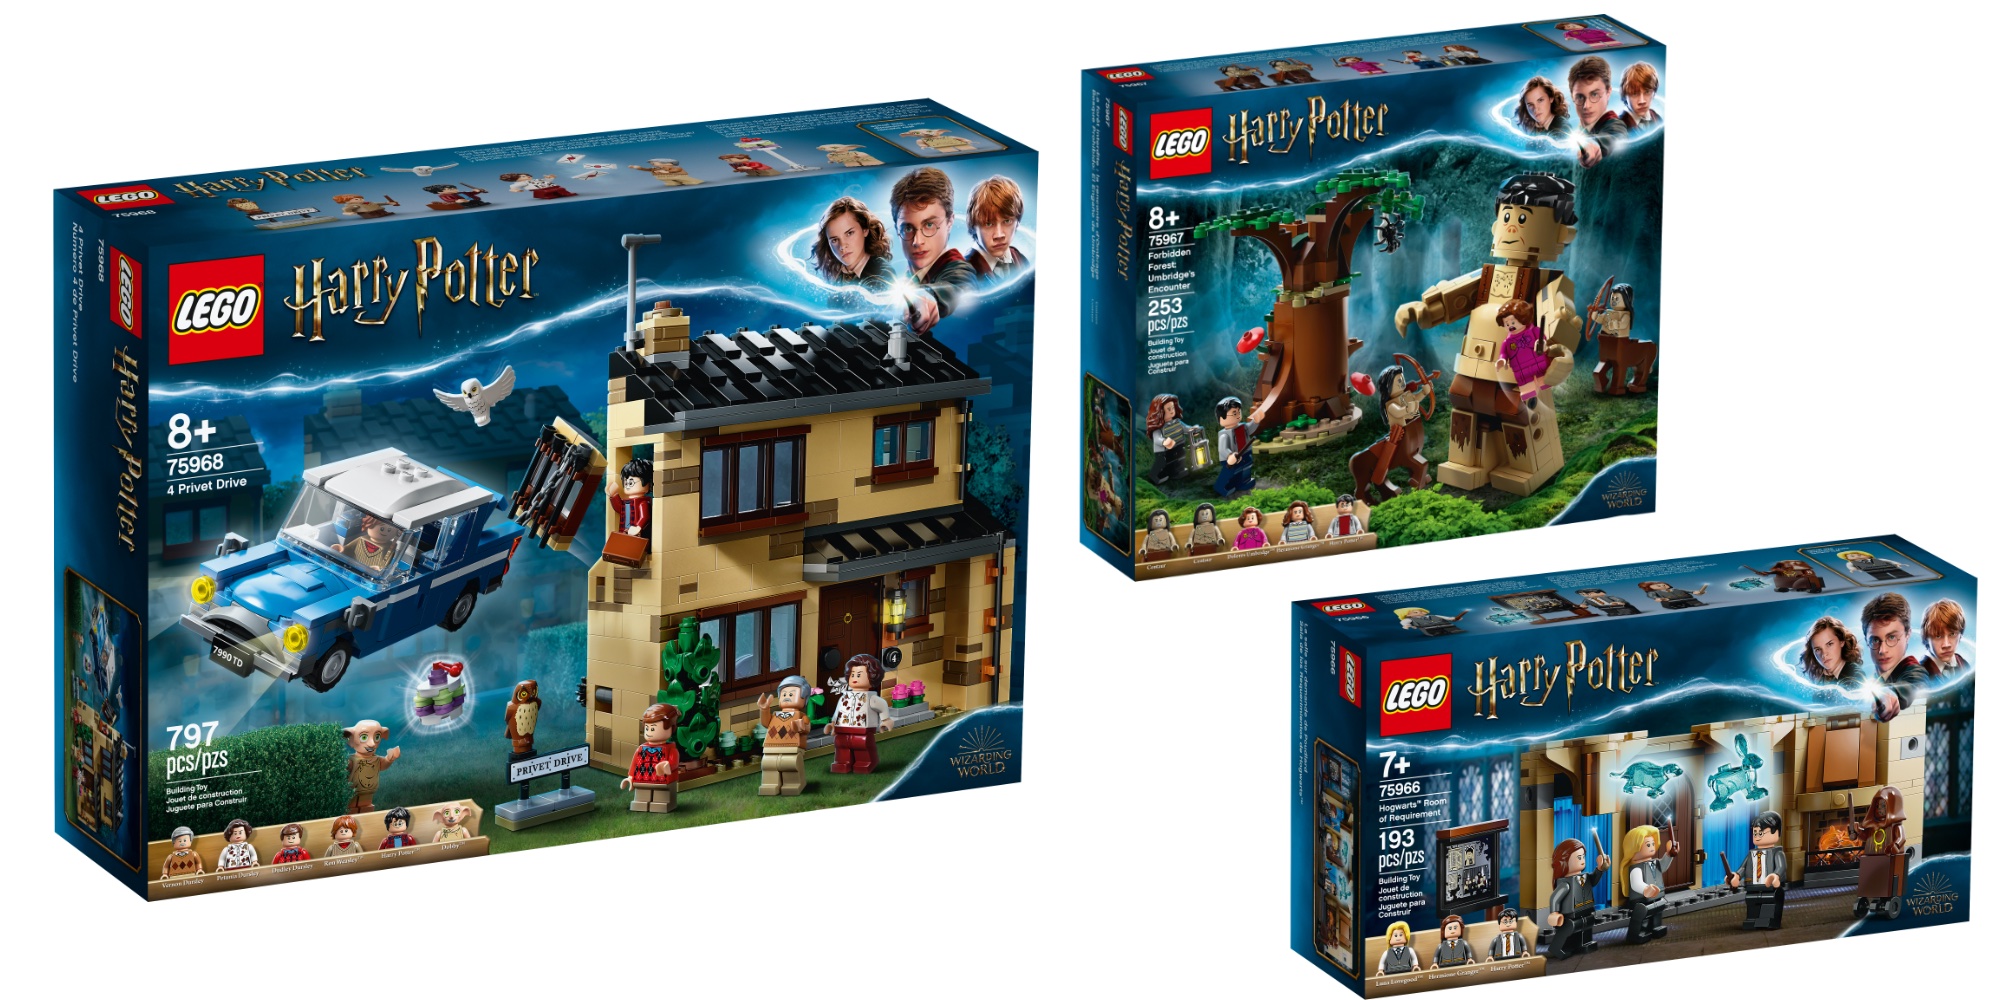 LEGO Harry Potter Summer 2020 wave brings six new kits 9to5Toys